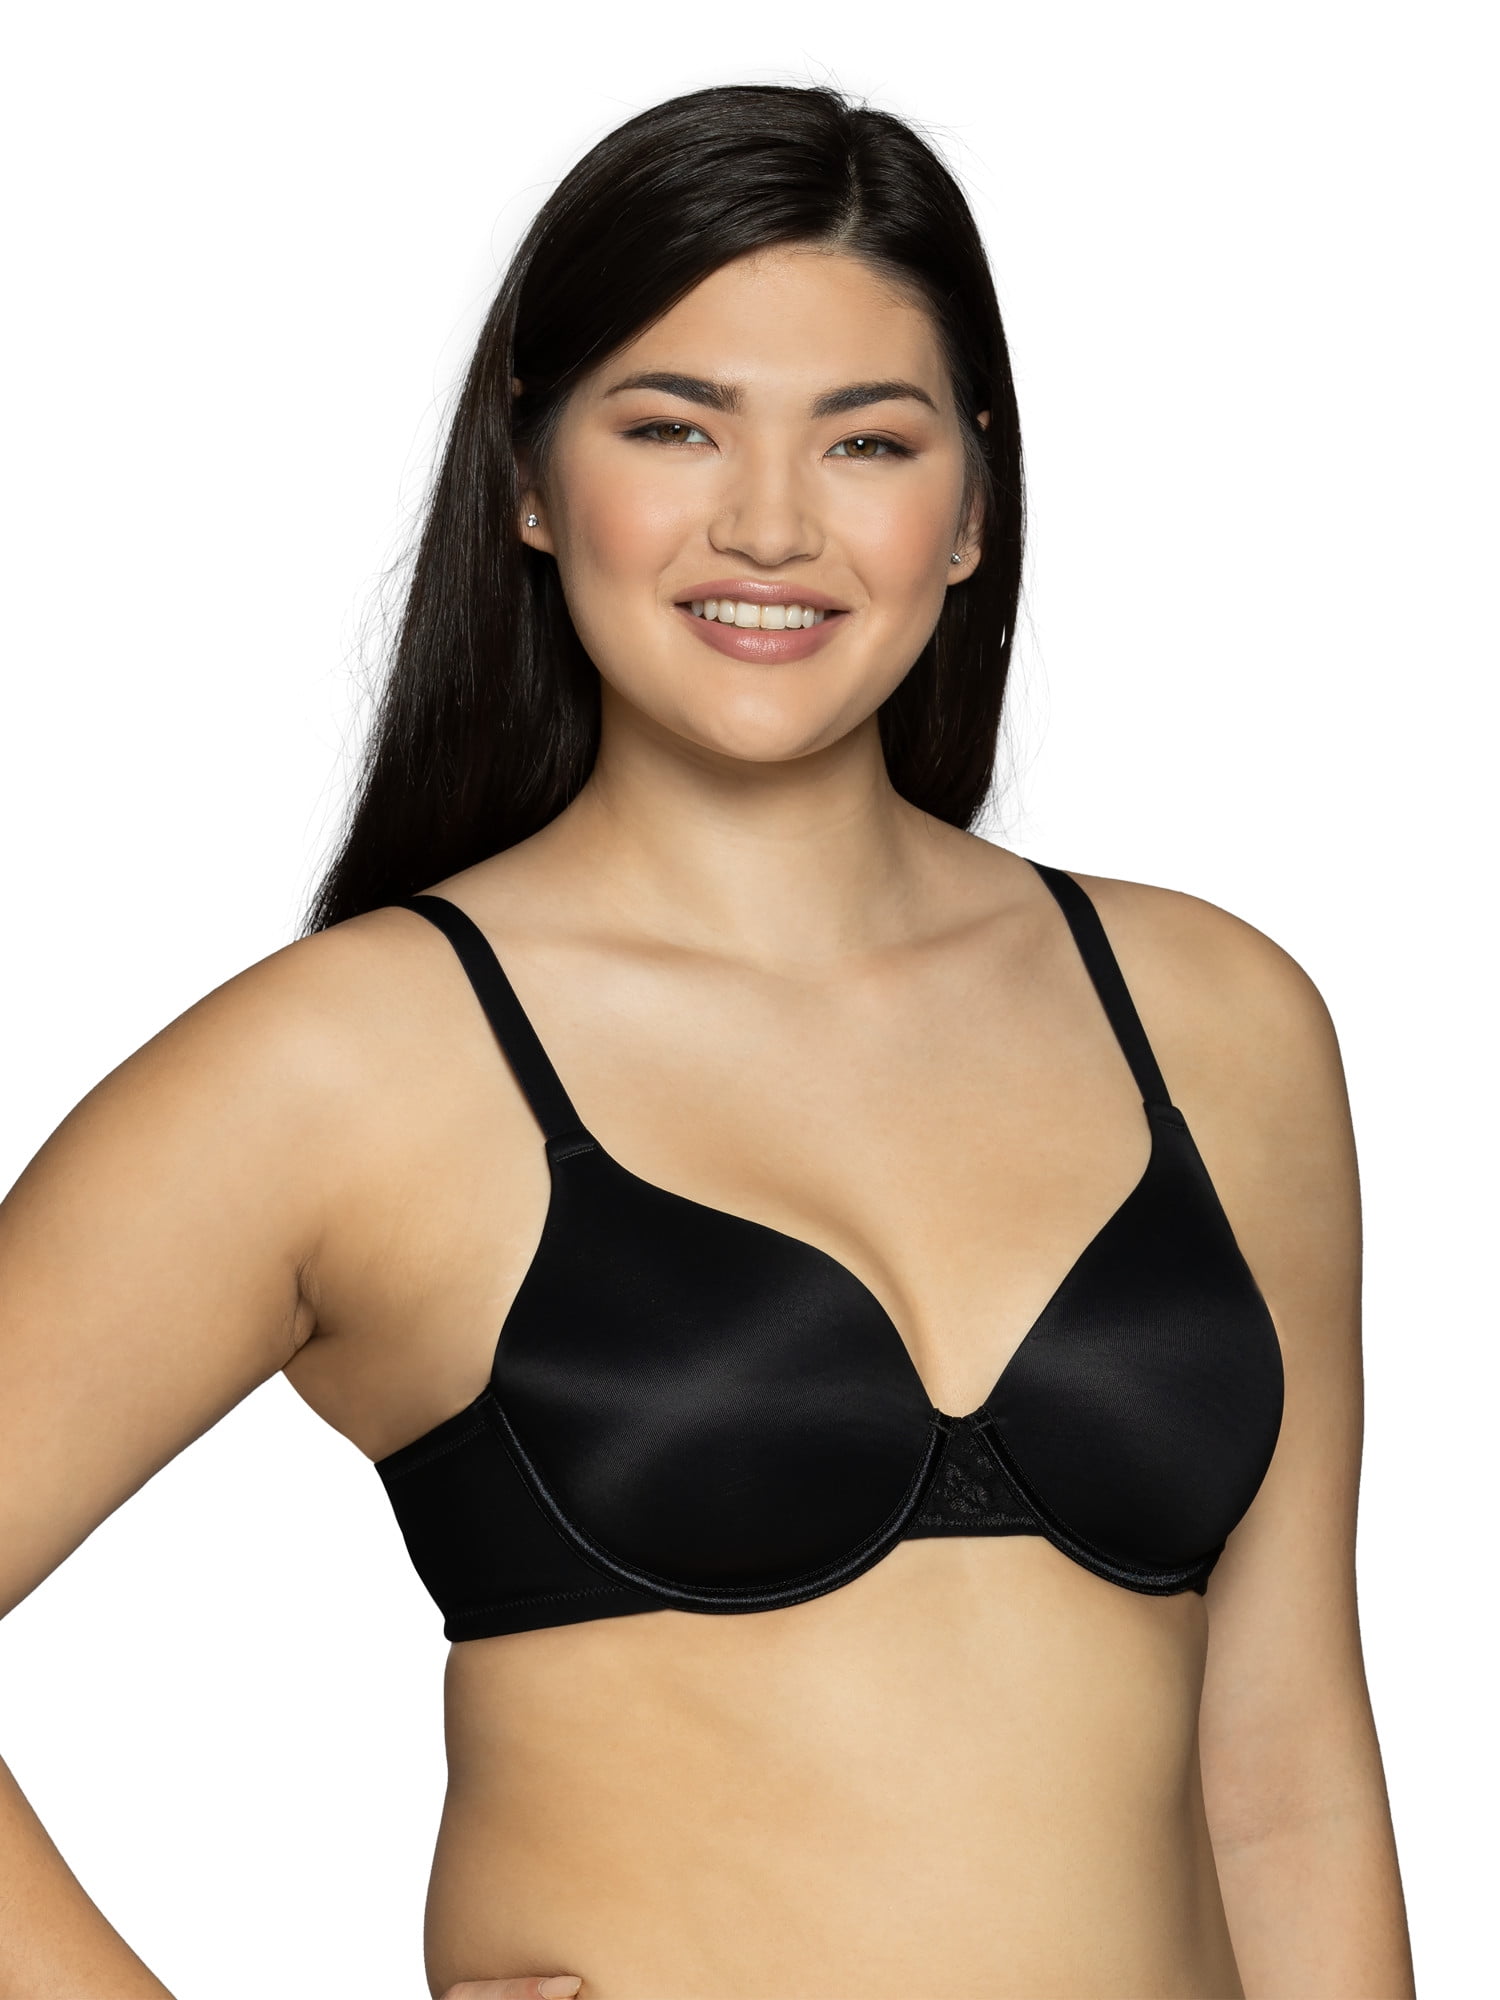 Fruit of the Loom Women's Lightly Padded Wirefree Bra, Style 96238 